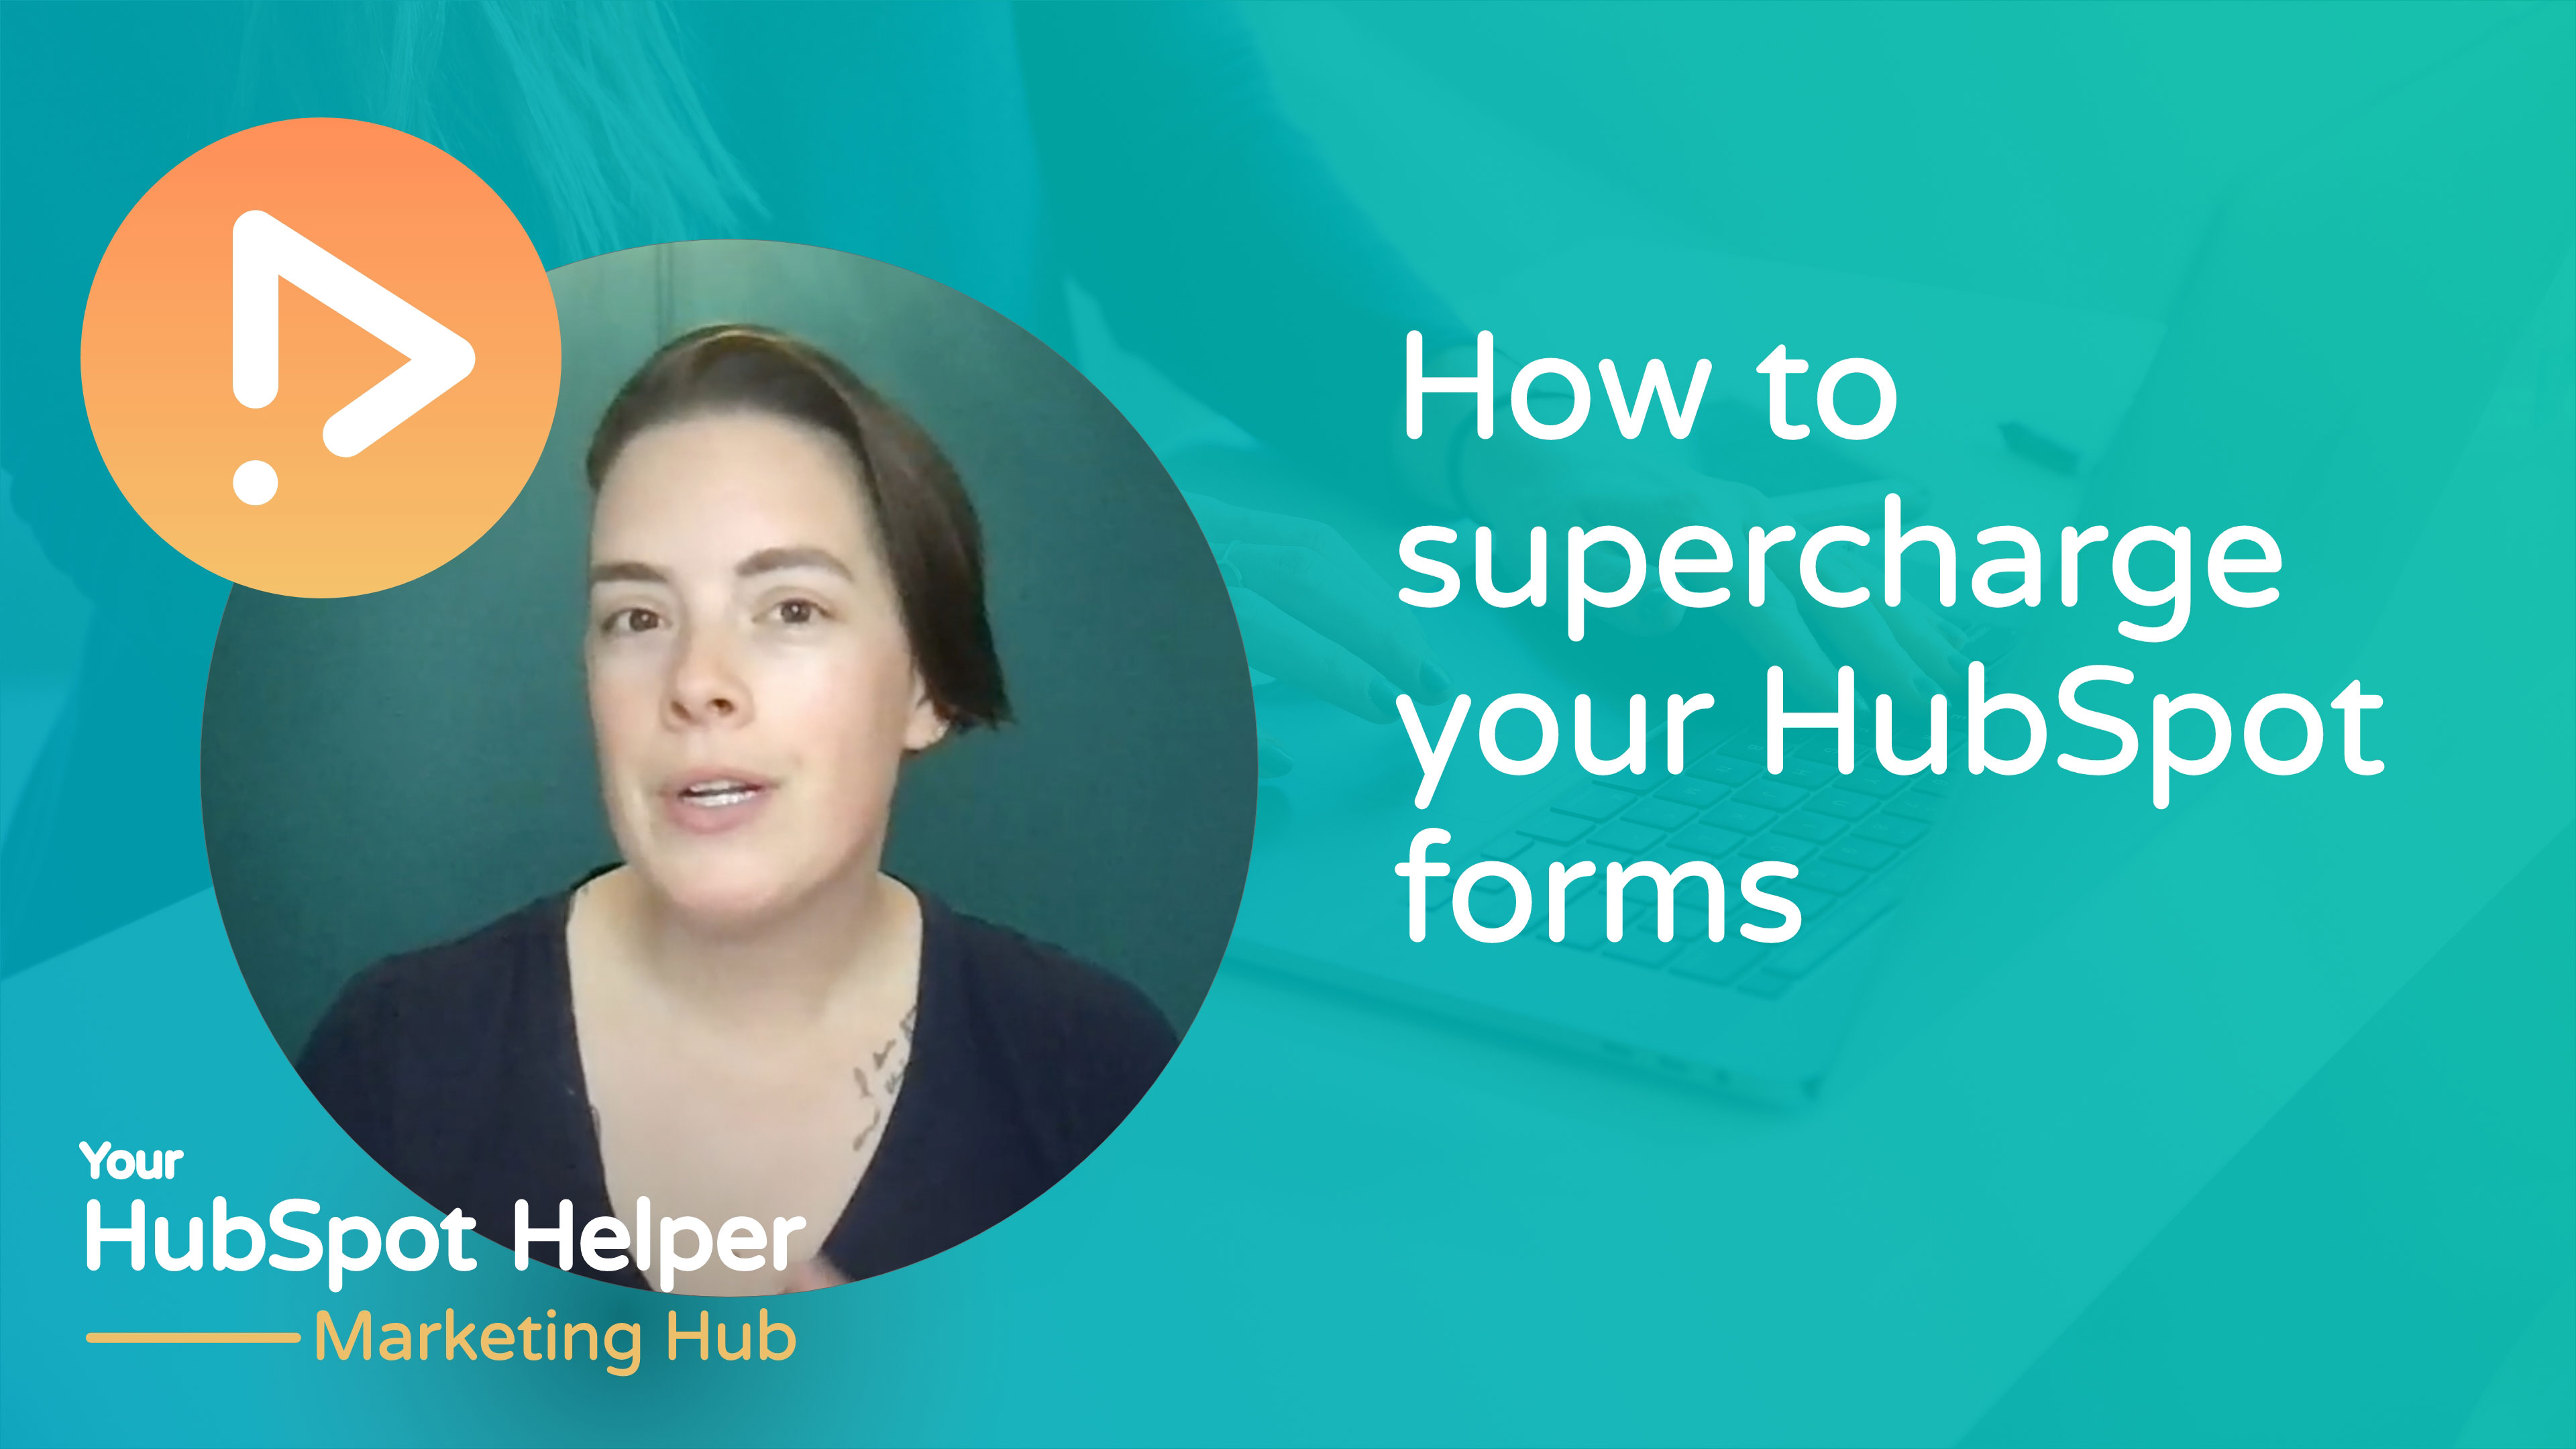 How to supercharge your HubSpot forms